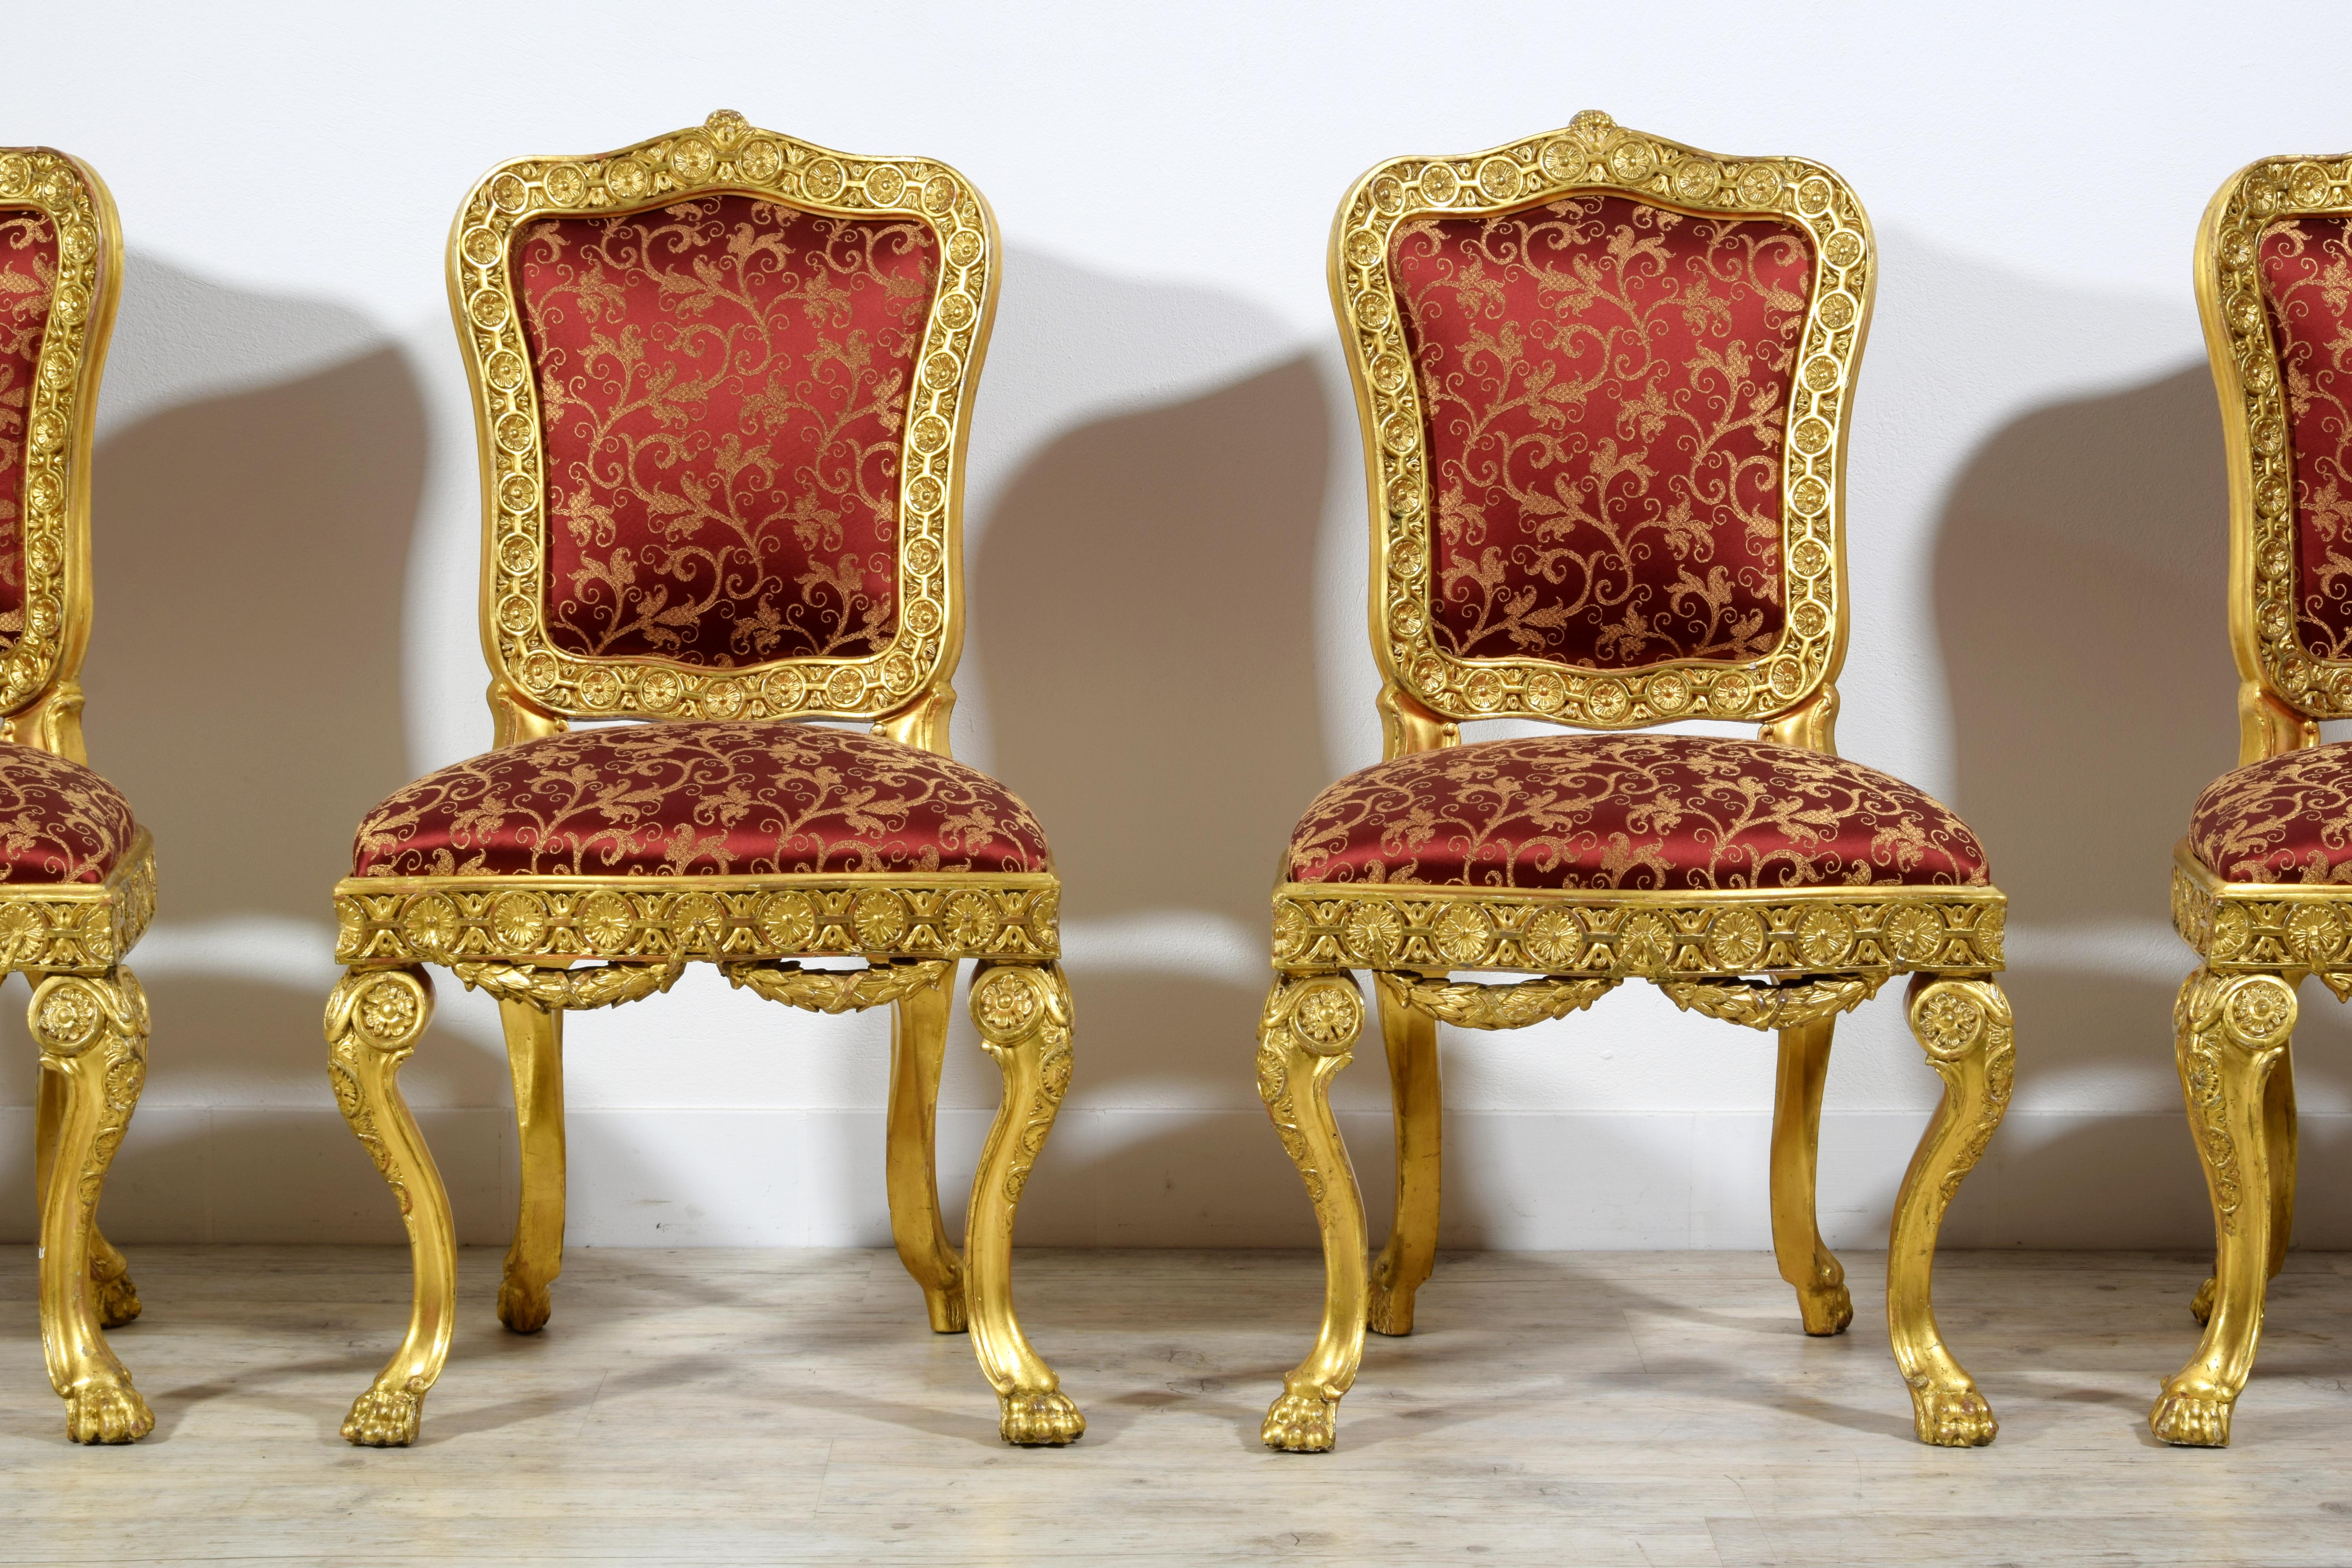 18th Century Four Italian Baroque Carved Giltwood Chairs For Sale 4